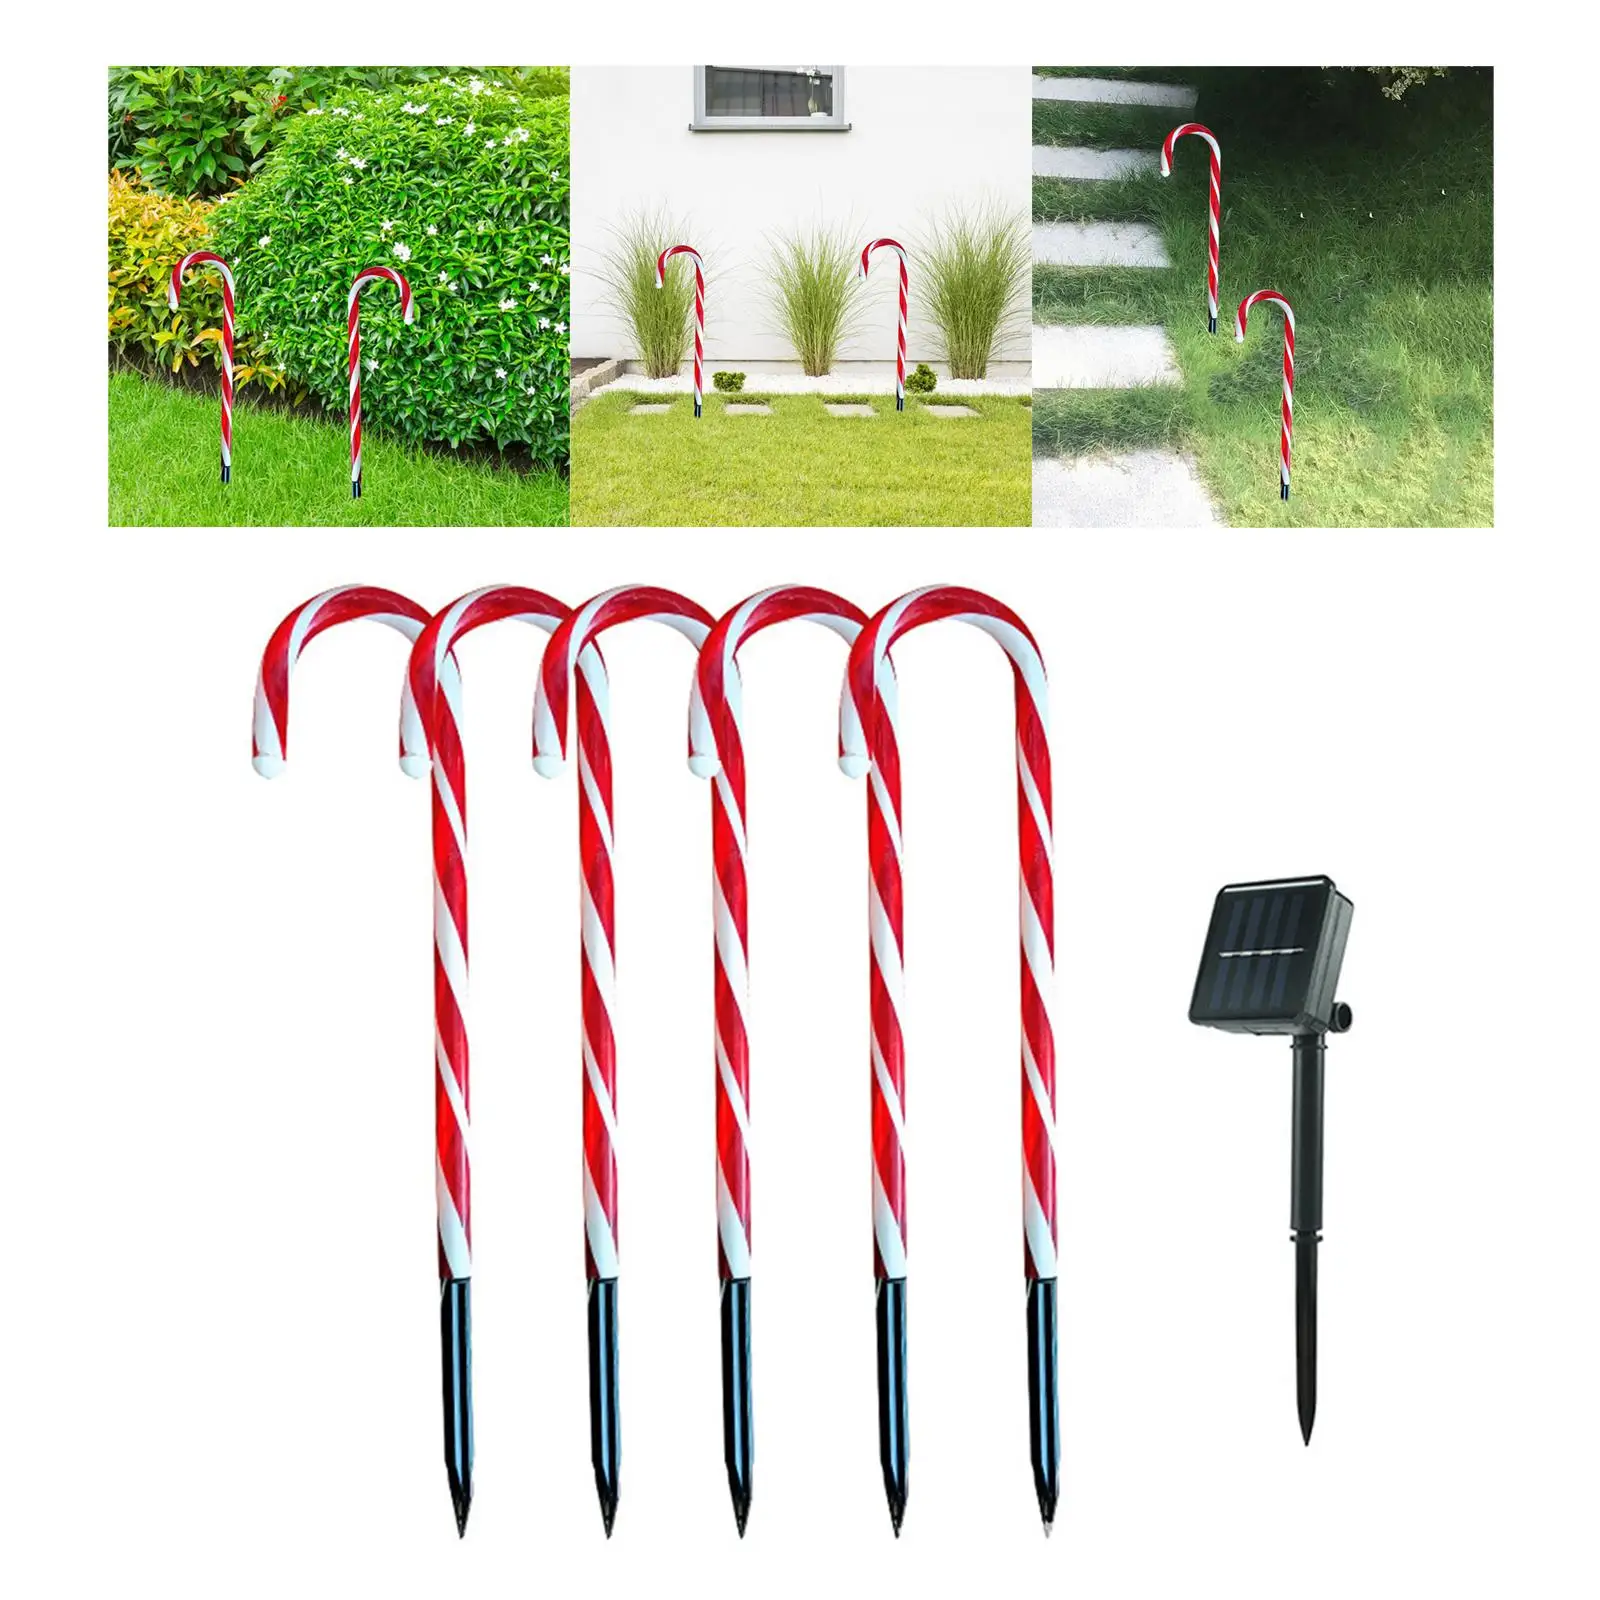 Christmas LED Lamps with Ground Stakes Crutch Light Decorations Candy Cane Solar Powered Lights for Holiday Lawn Driveway Patio